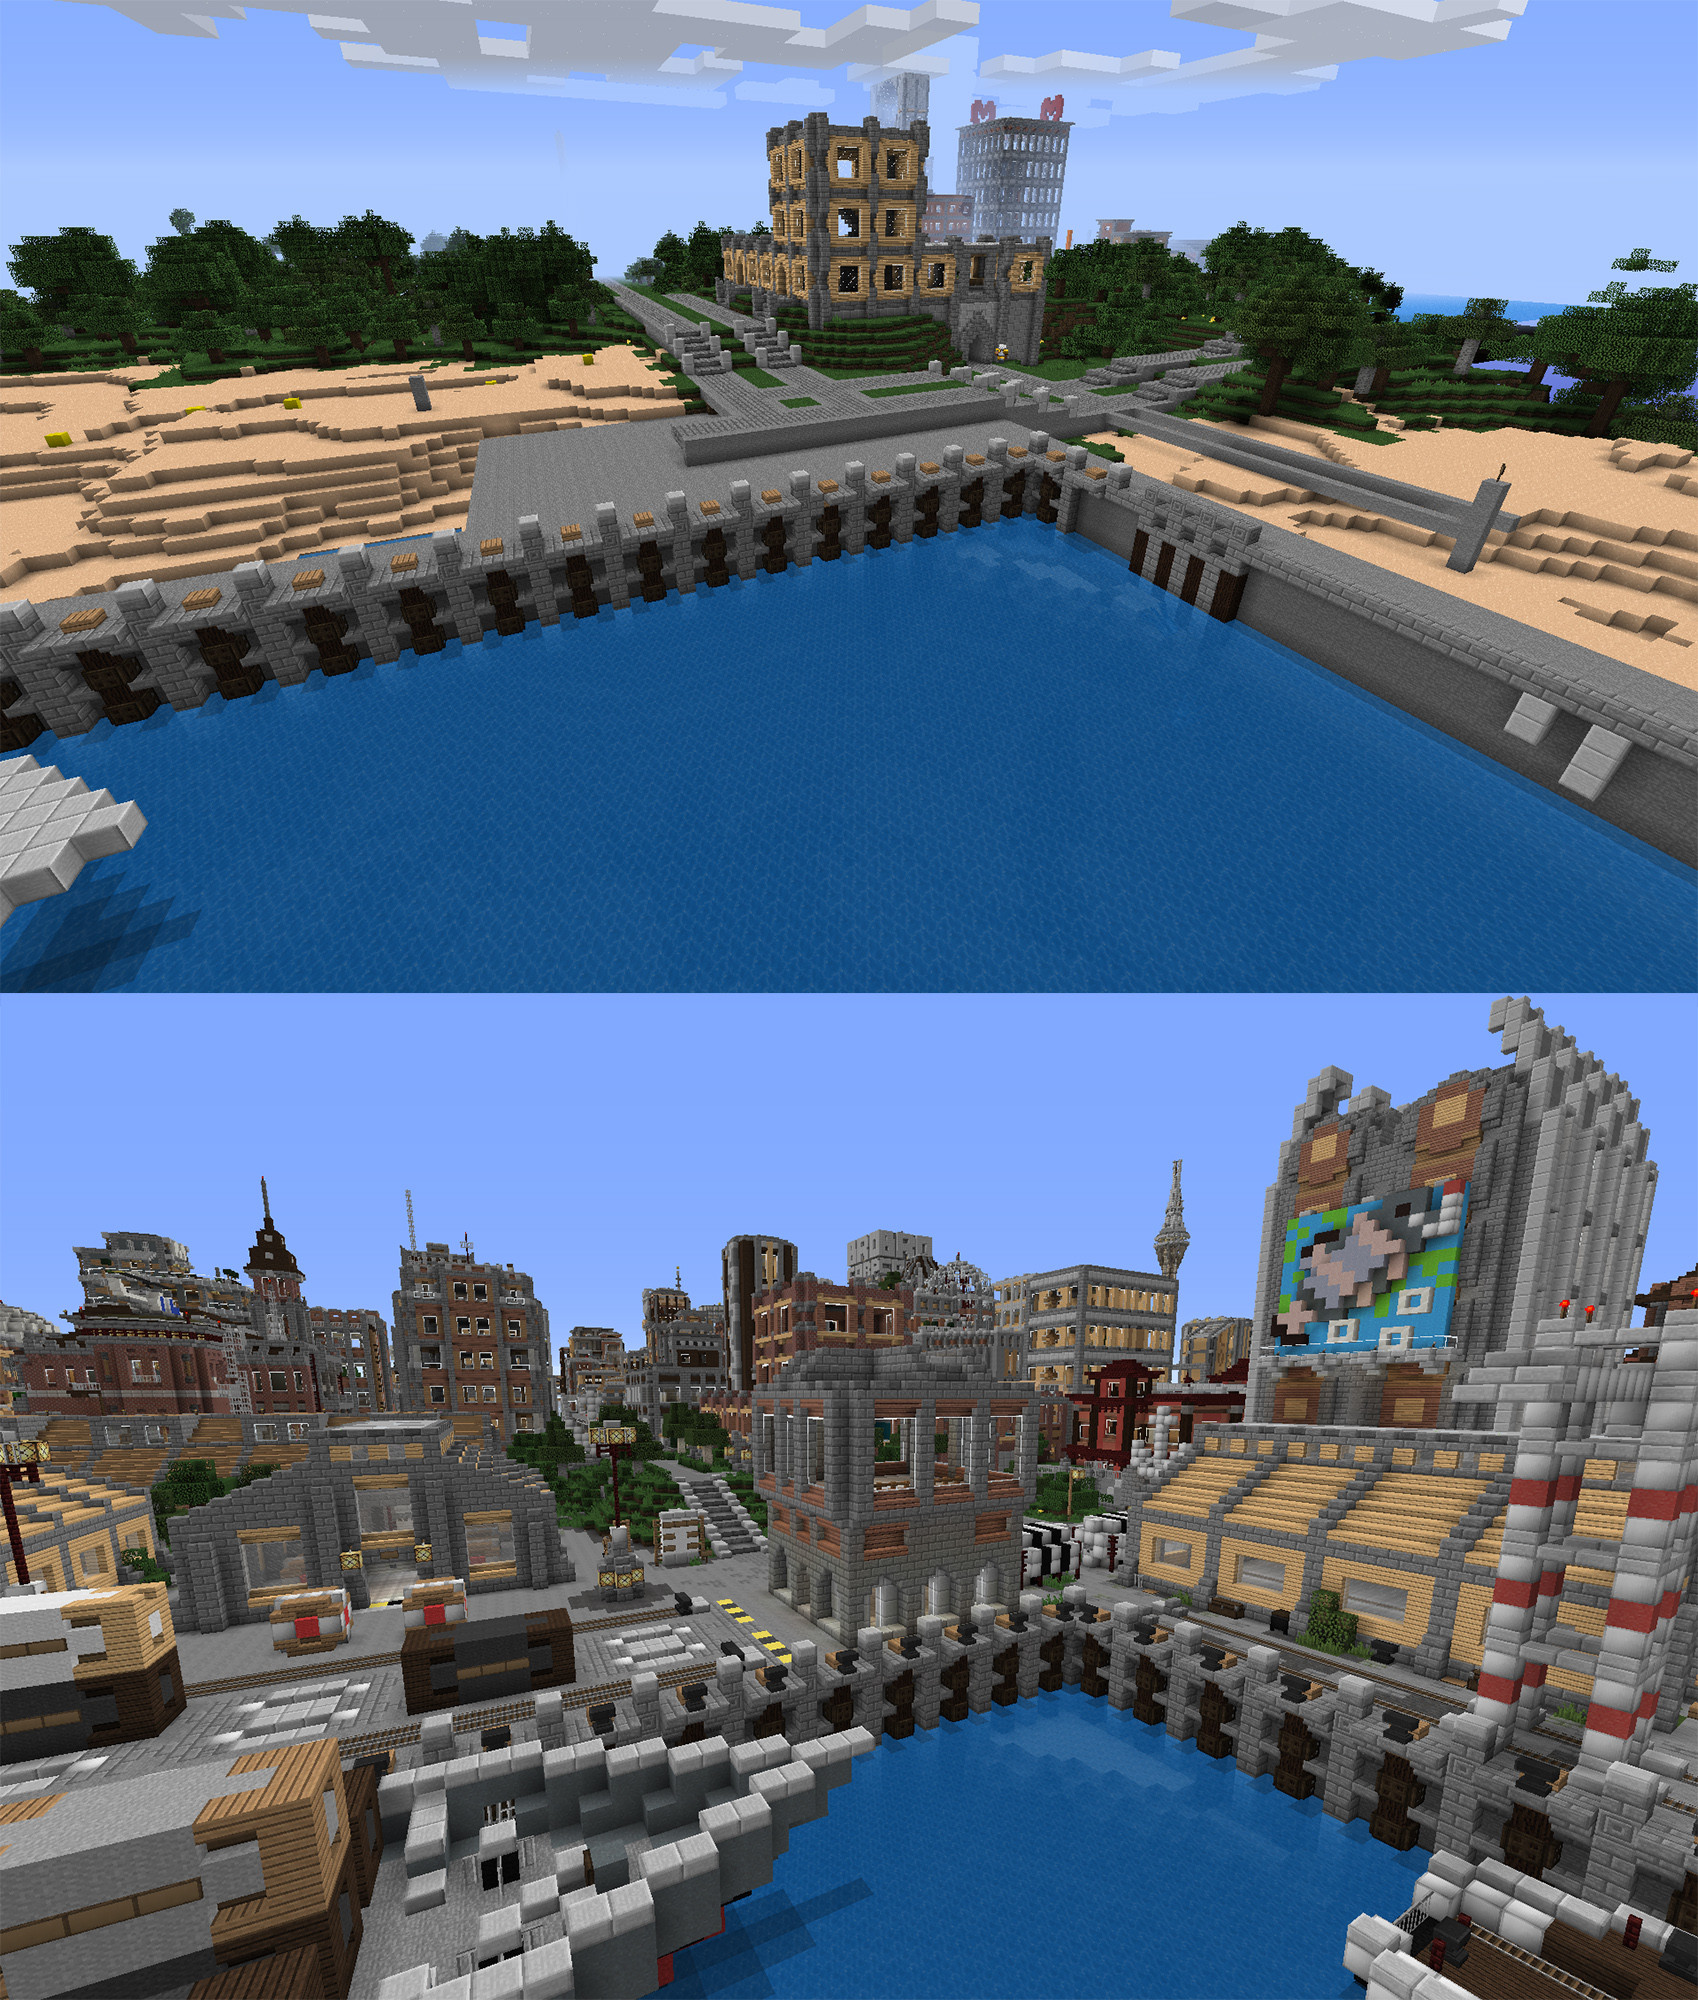 Years Of Work In Minecraft, As Told In GIFs